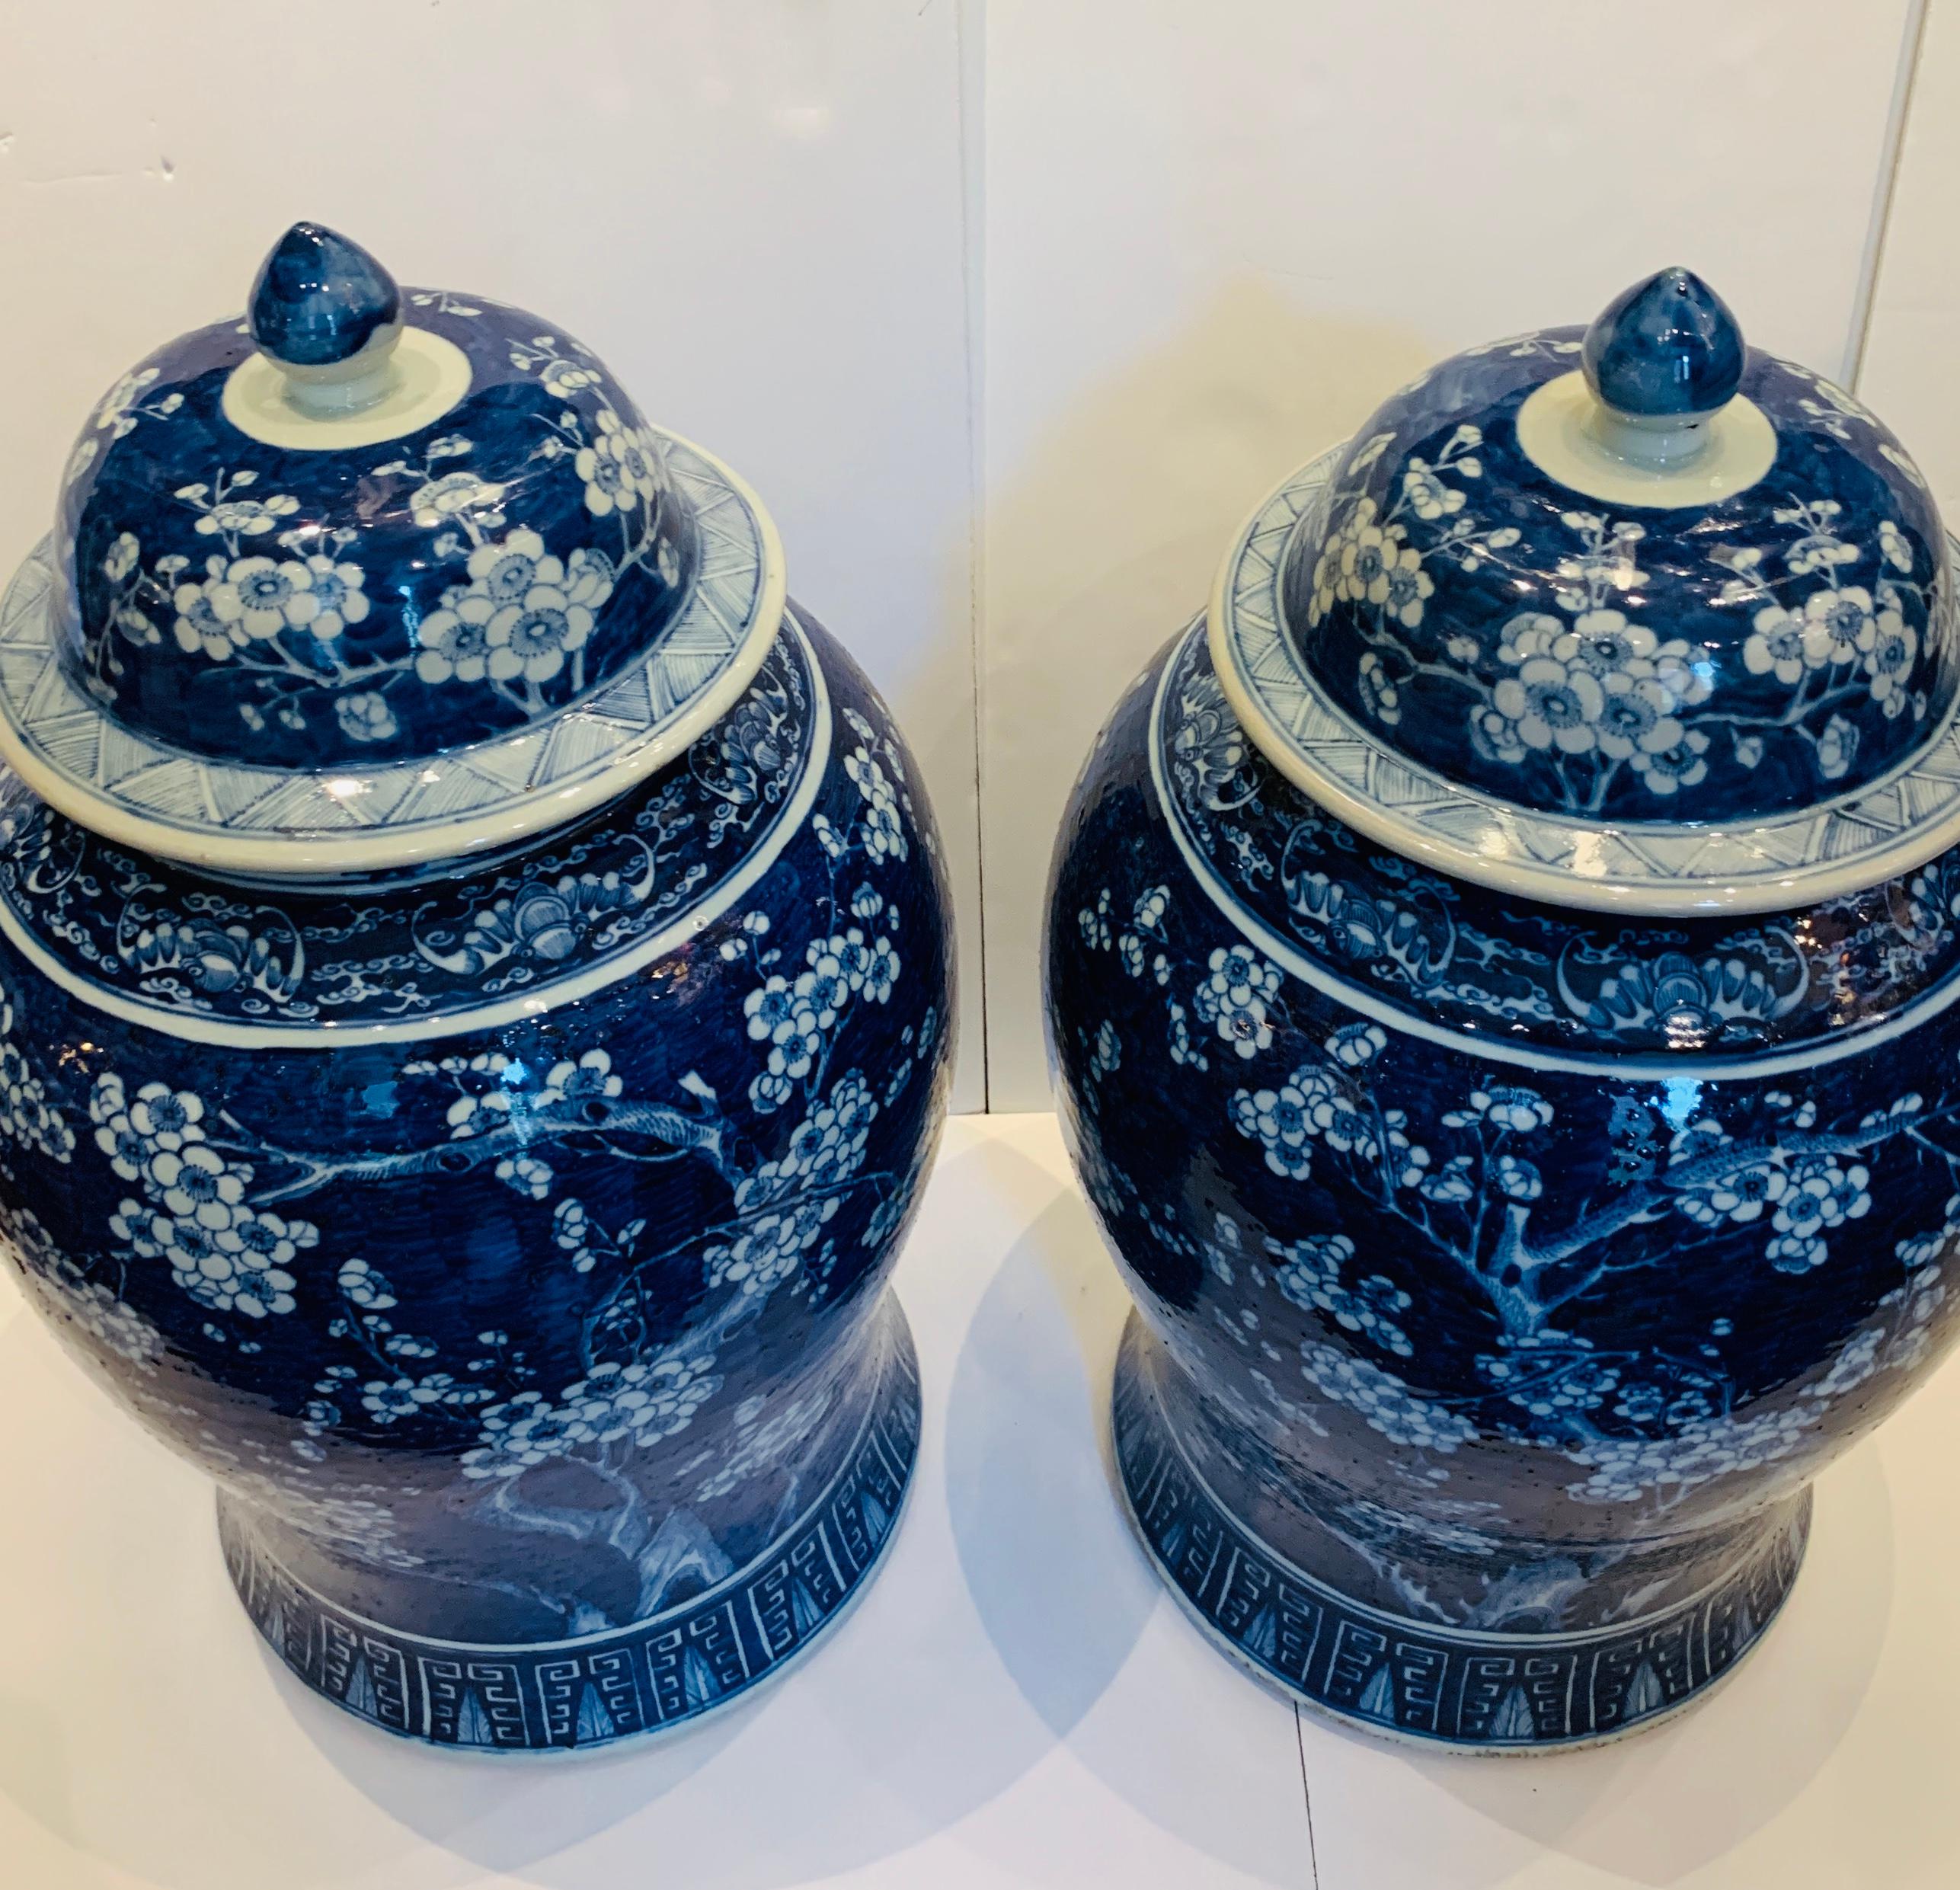 Pair of Large Blue and White Chinese Porcelain Jars Antique Qing Dynasty 1